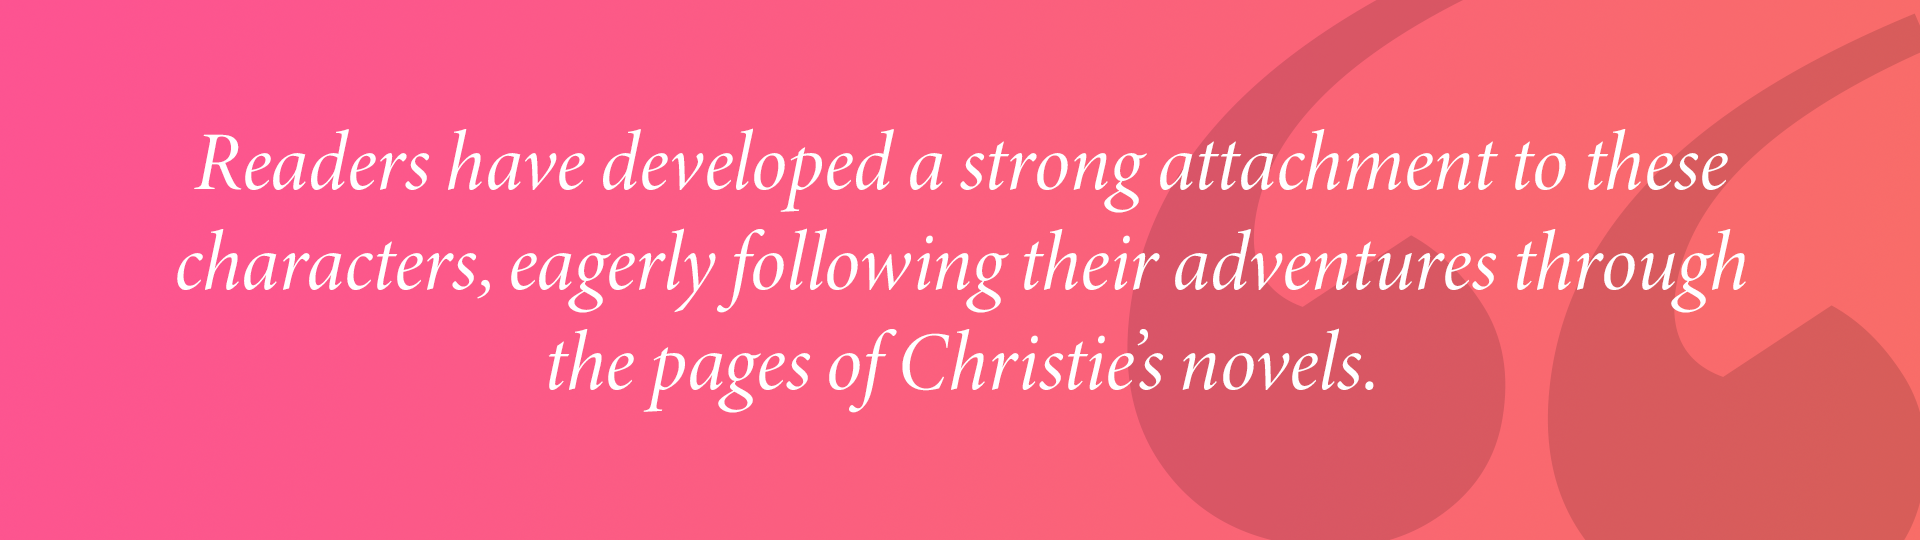 Readers have developed a strong attachment to these characters, eagerly following their adventures through the pages of Christie’s novels.